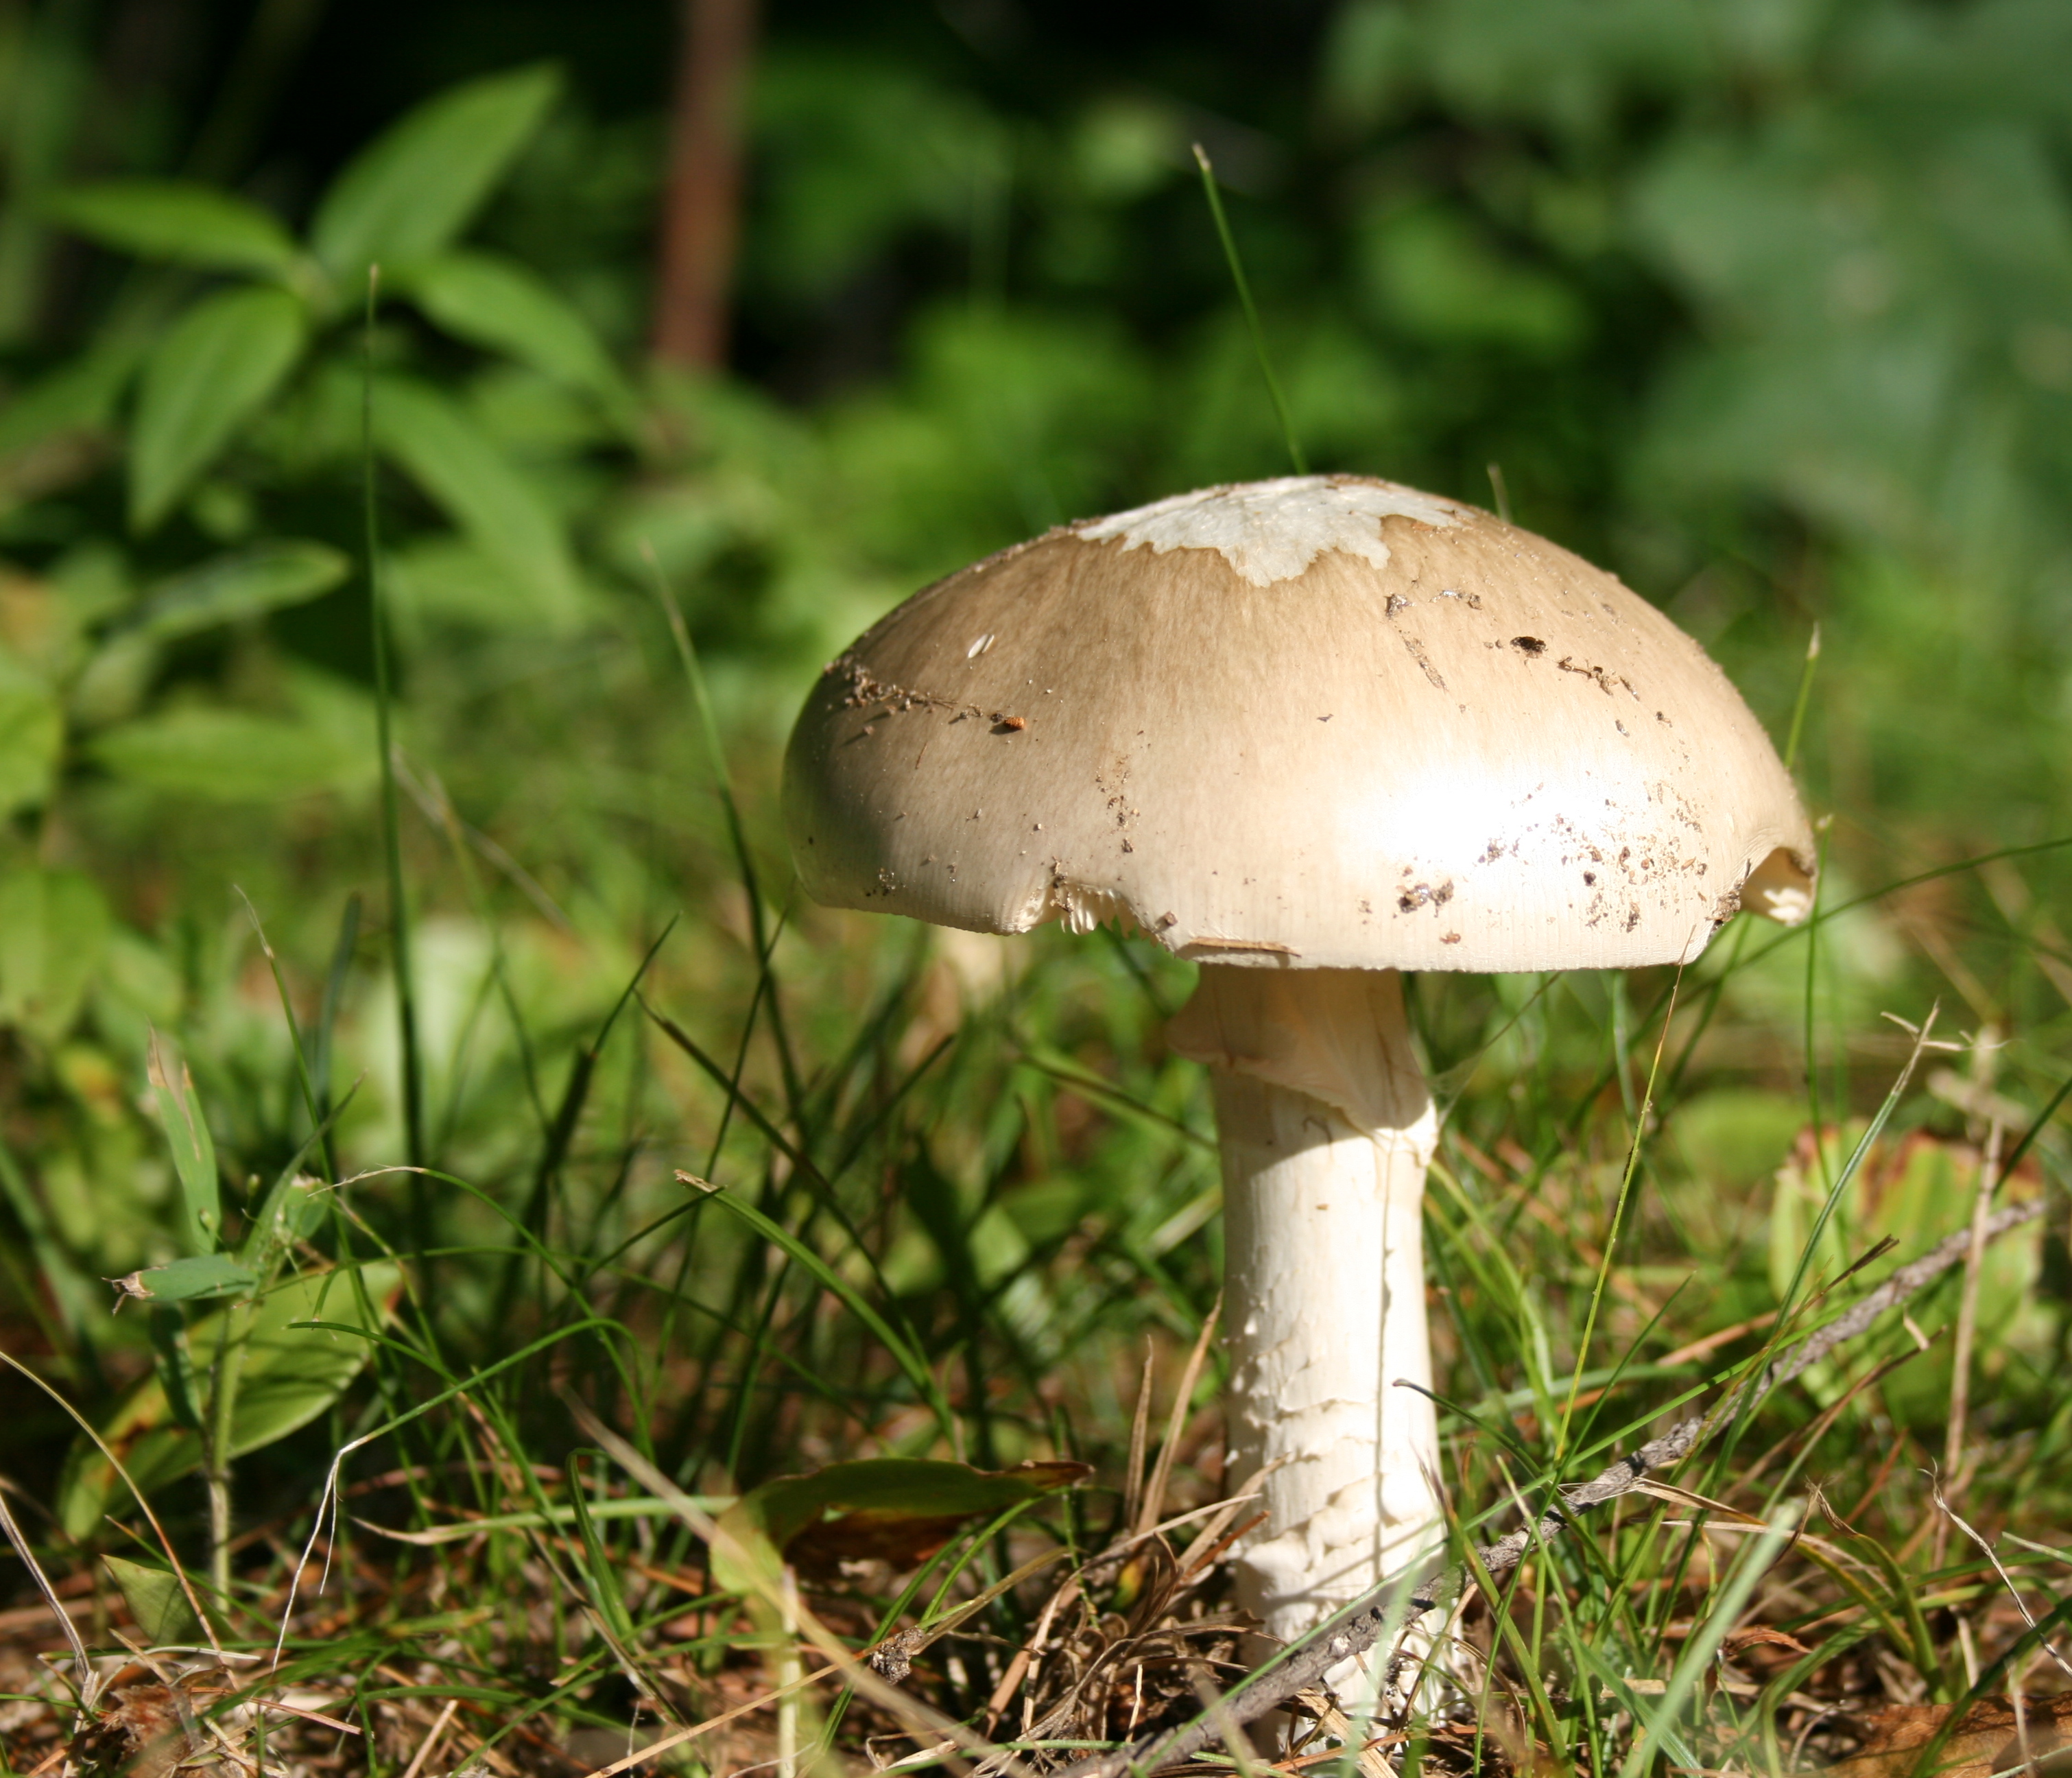 File:Toadstool in New Hampshire.JPG - Wikimedia Commons